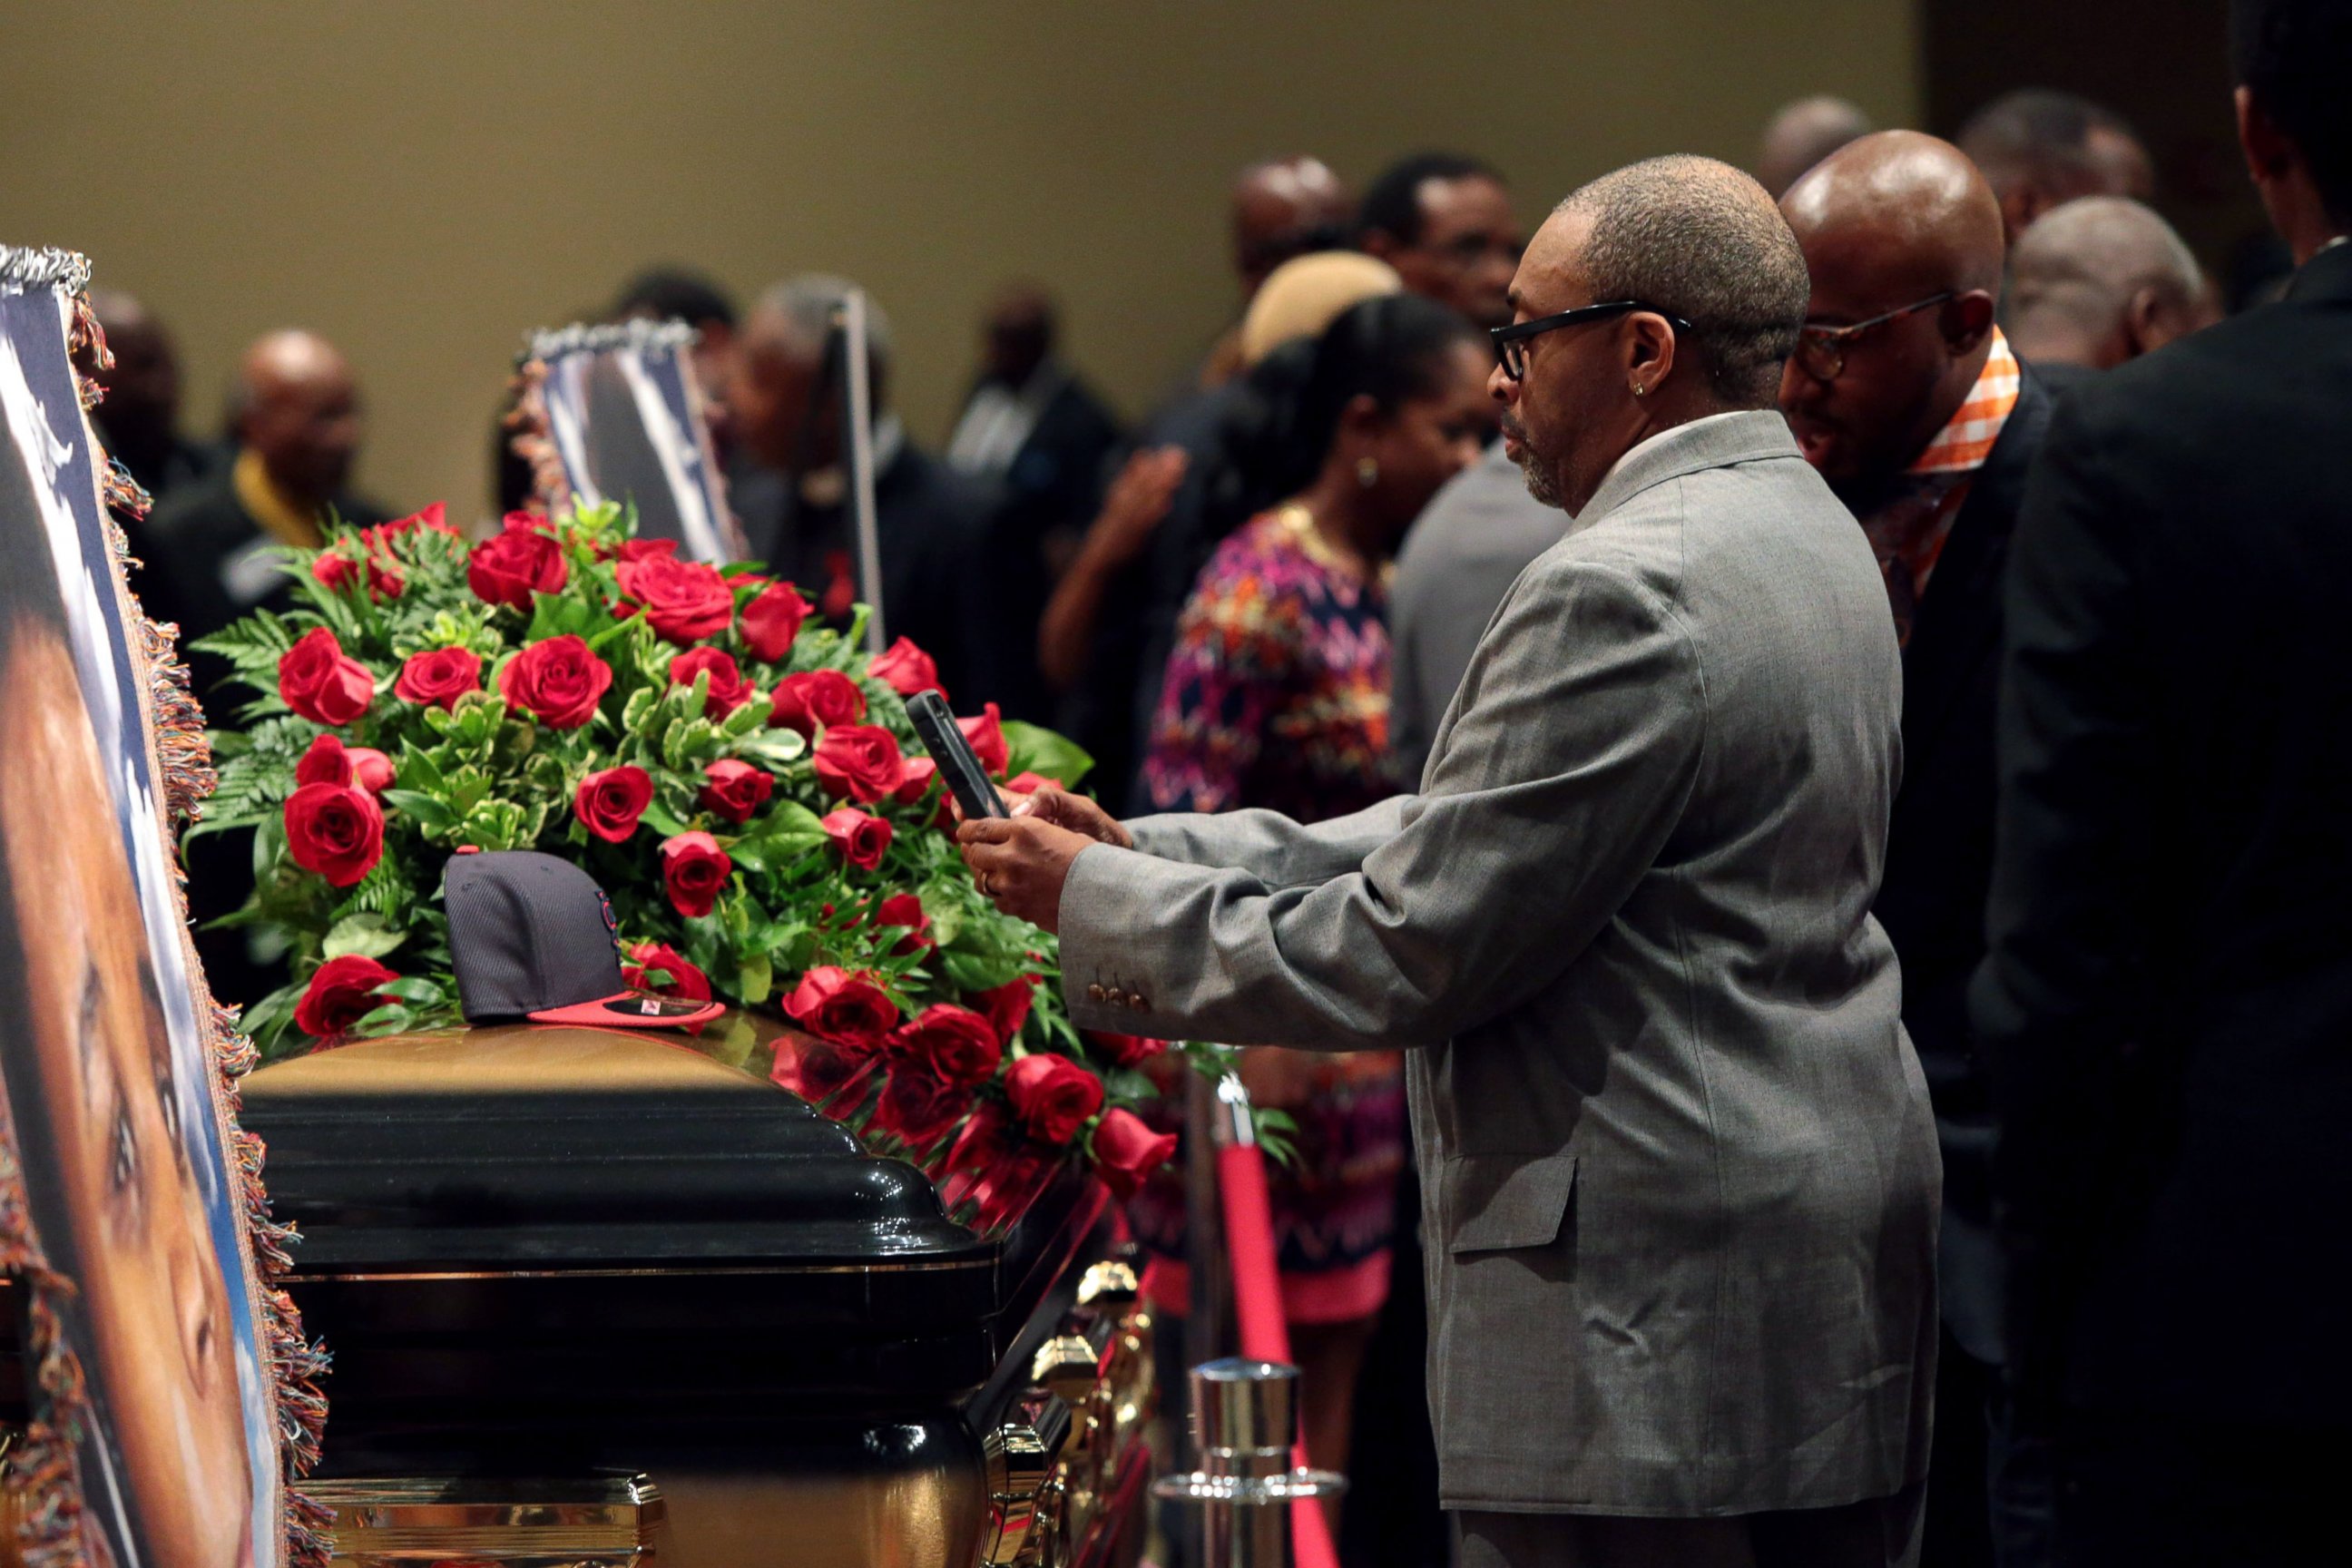 PHOTO: Director Spike Lee takes a picture of a black St. Louis Cardinals baseball cap that rests on top of the casket of Michael Brown inside Friendly Temple Missionary Baptist Church awaiting the start of his funeral on Aug. 25, 2014 in St. Louis Mo.